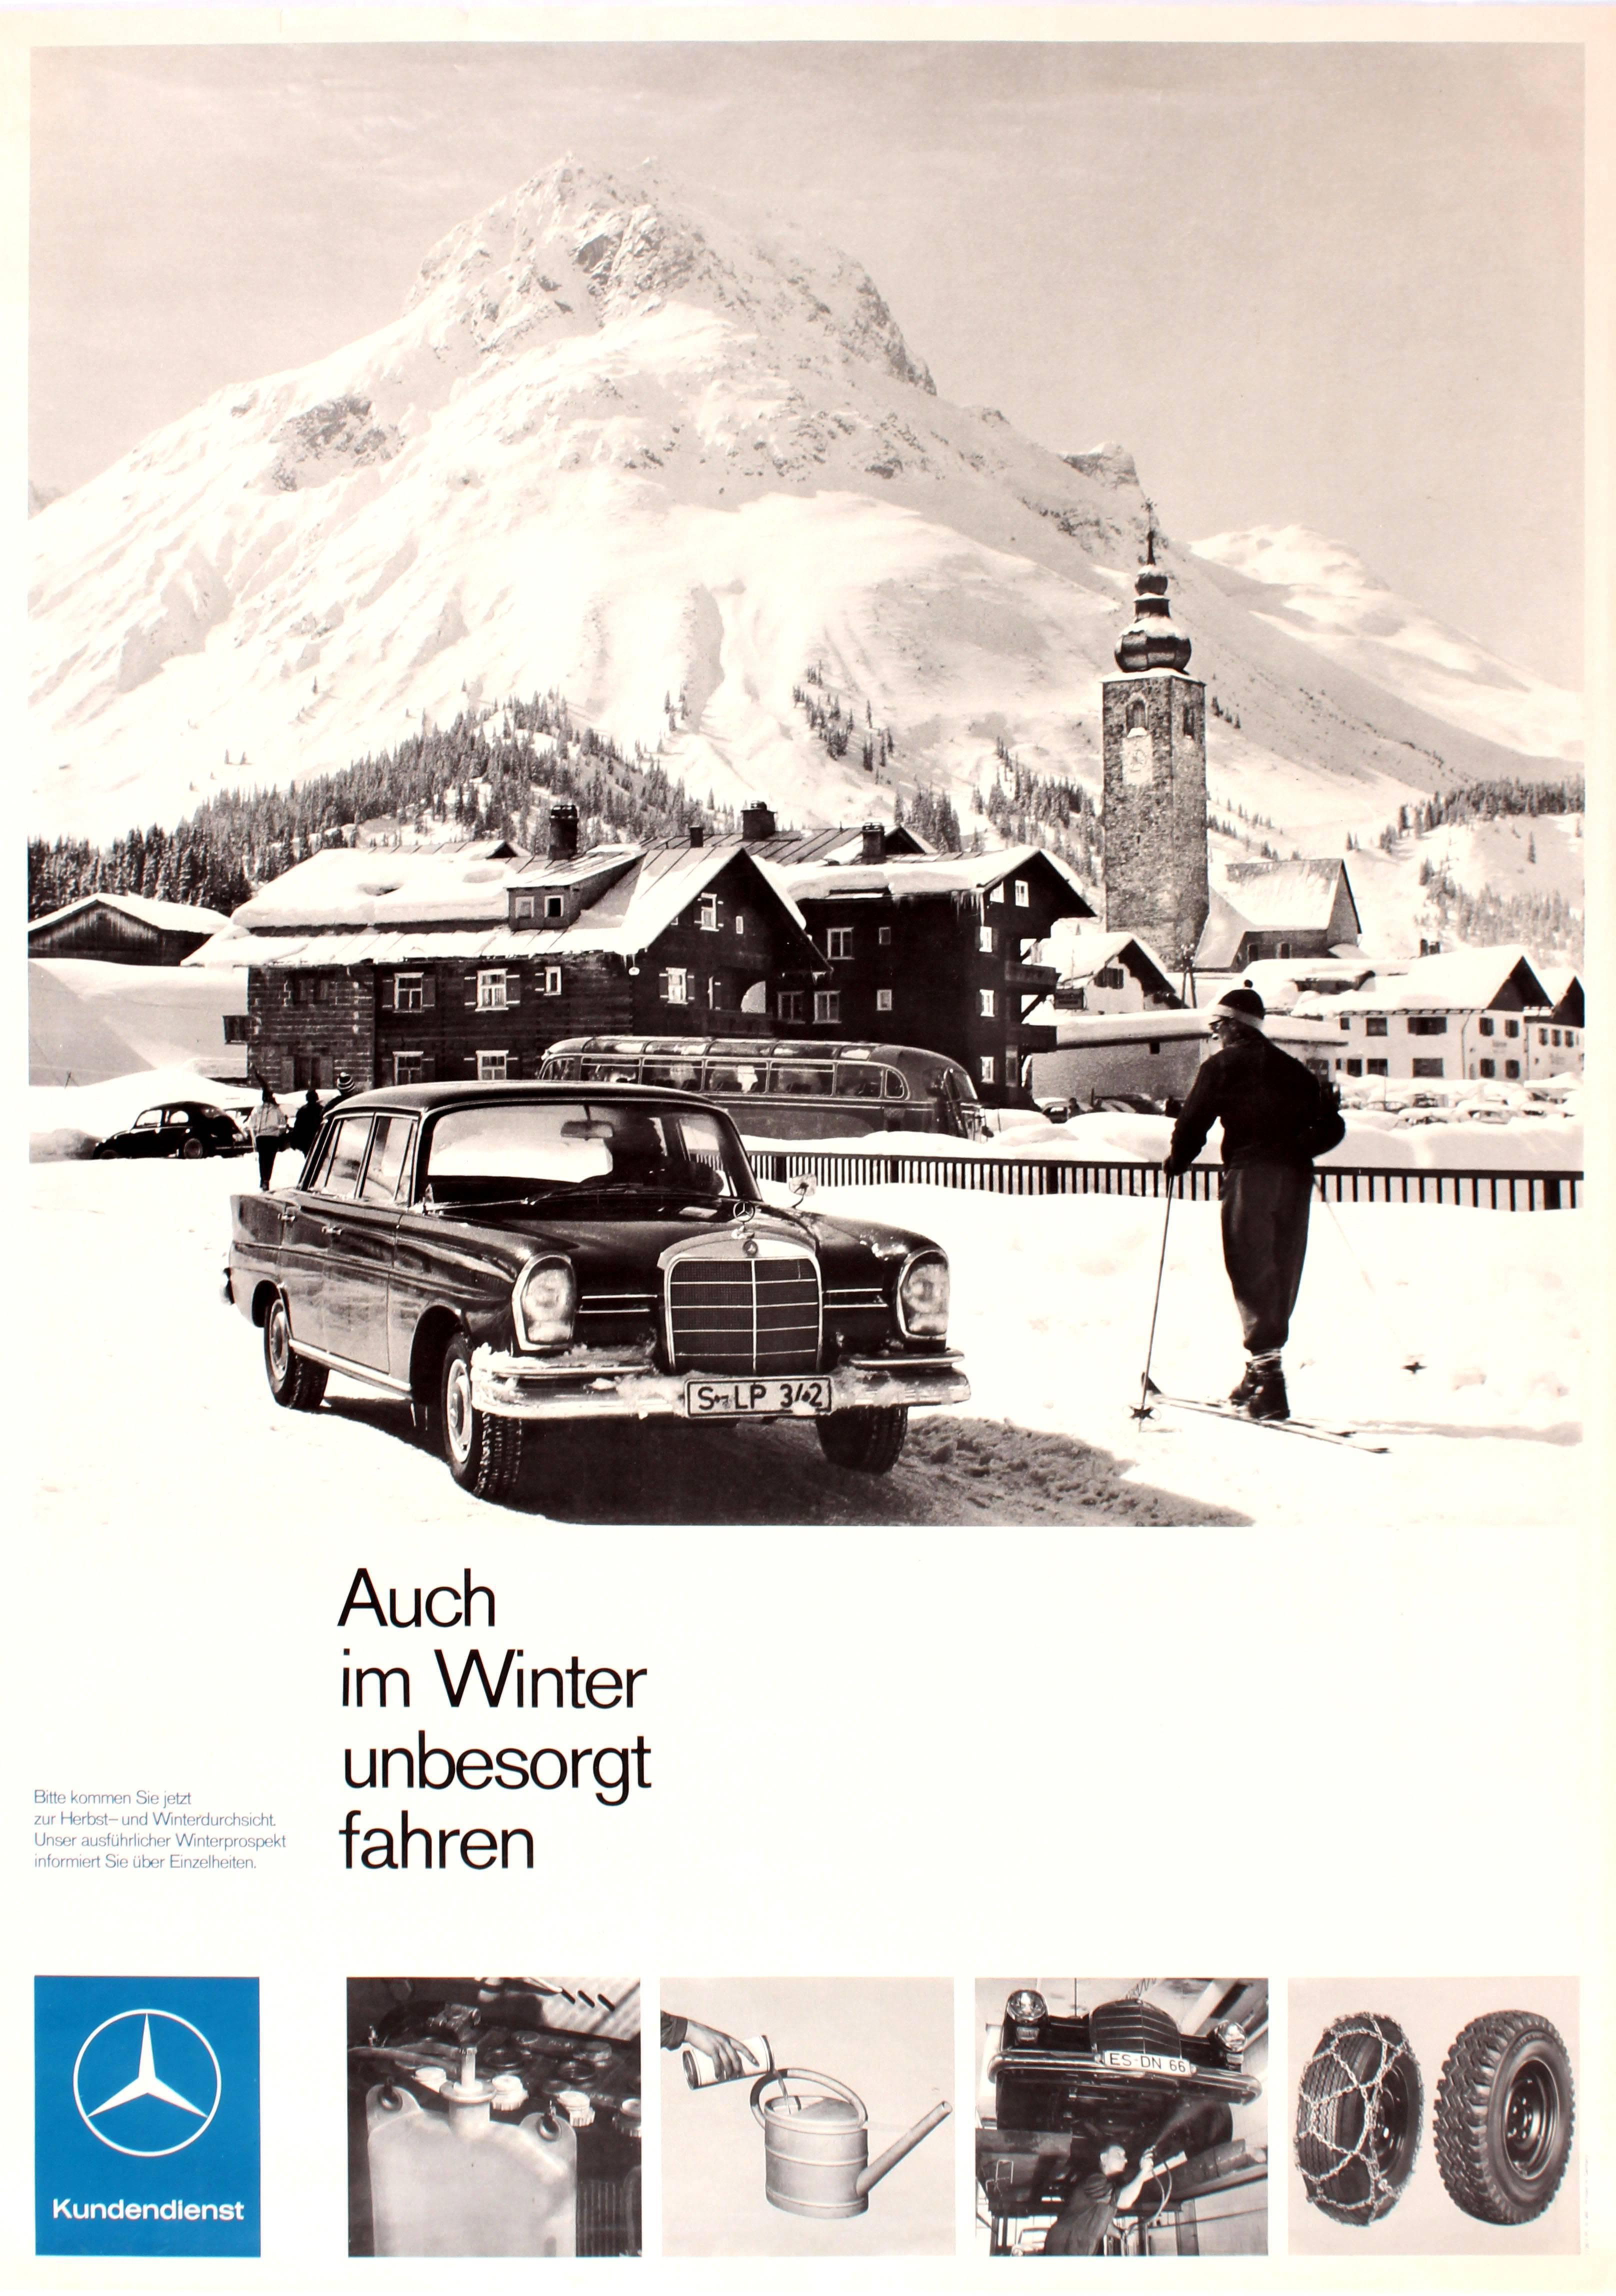 Unknown Print - Original Vintage Mercedes Benz Advertising Poster - Even In Winter Drive Safely